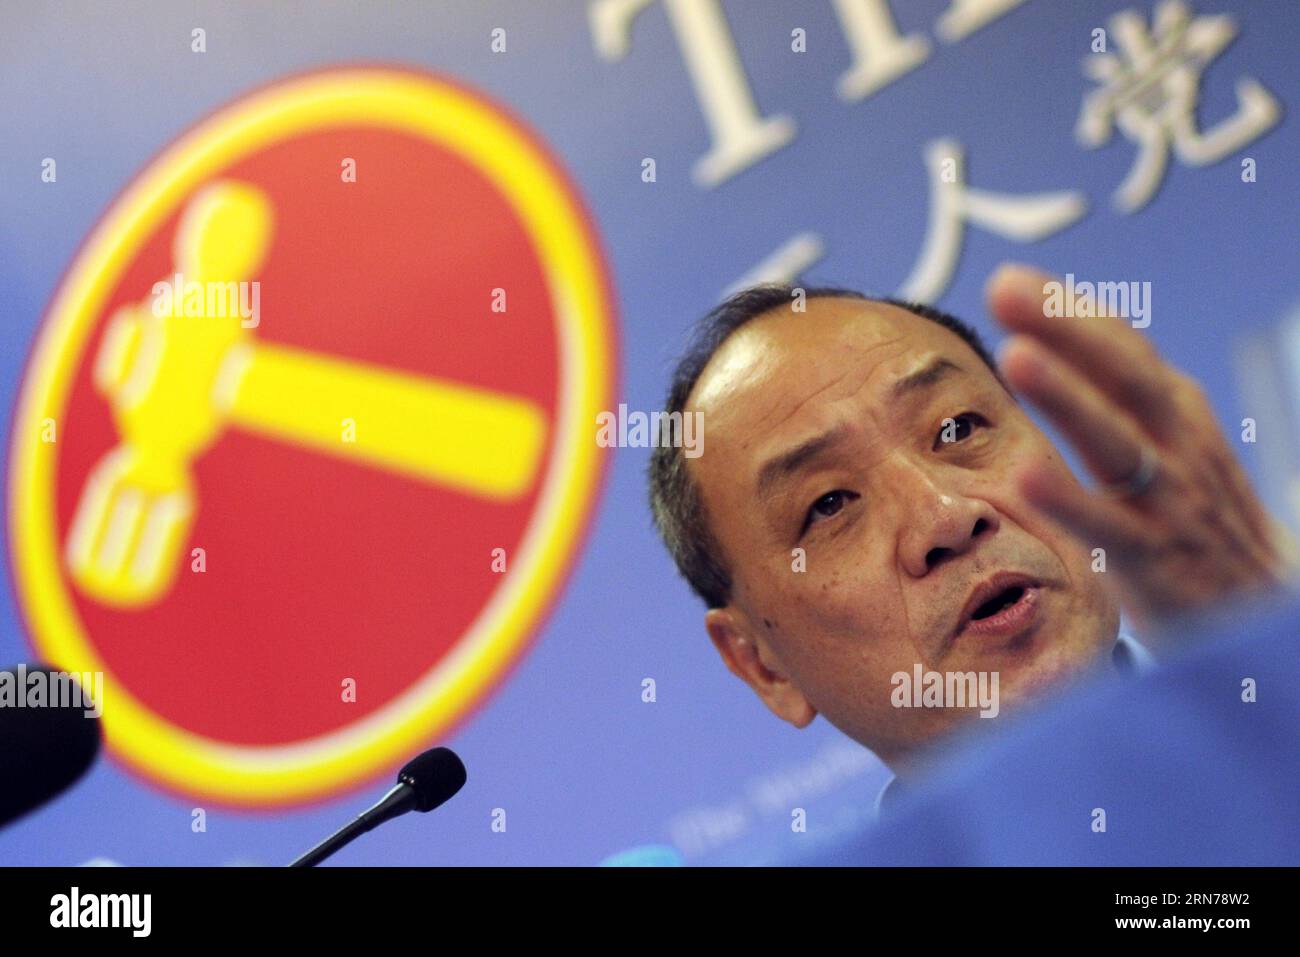 (150826) -- SINGAPORE, Aug. 26, 2015 -- Singapore s Workers Party (WP) s Secretary-General Low Thia Khiang attends a press conference held in the WP s head office in Singapore on Aug. 26, 2015. The WP held a press conference here on Wednesday to introduce four new candidates contesting in the upcoming general elections. ) (lrz) SINGAPORE-WORKERS PARTY-PRESS CONFERENCE-NEW CANDIDATES ThenxChihxWey PUBLICATIONxNOTxINxCHN   150826 Singapore Aug 26 2015 Singapore S Workers Party wp S Secretary General Low Thia Khiang Attends a Press Conference Hero in The wp S Head Office in Singapore ON Aug 26 20 Stock Photo